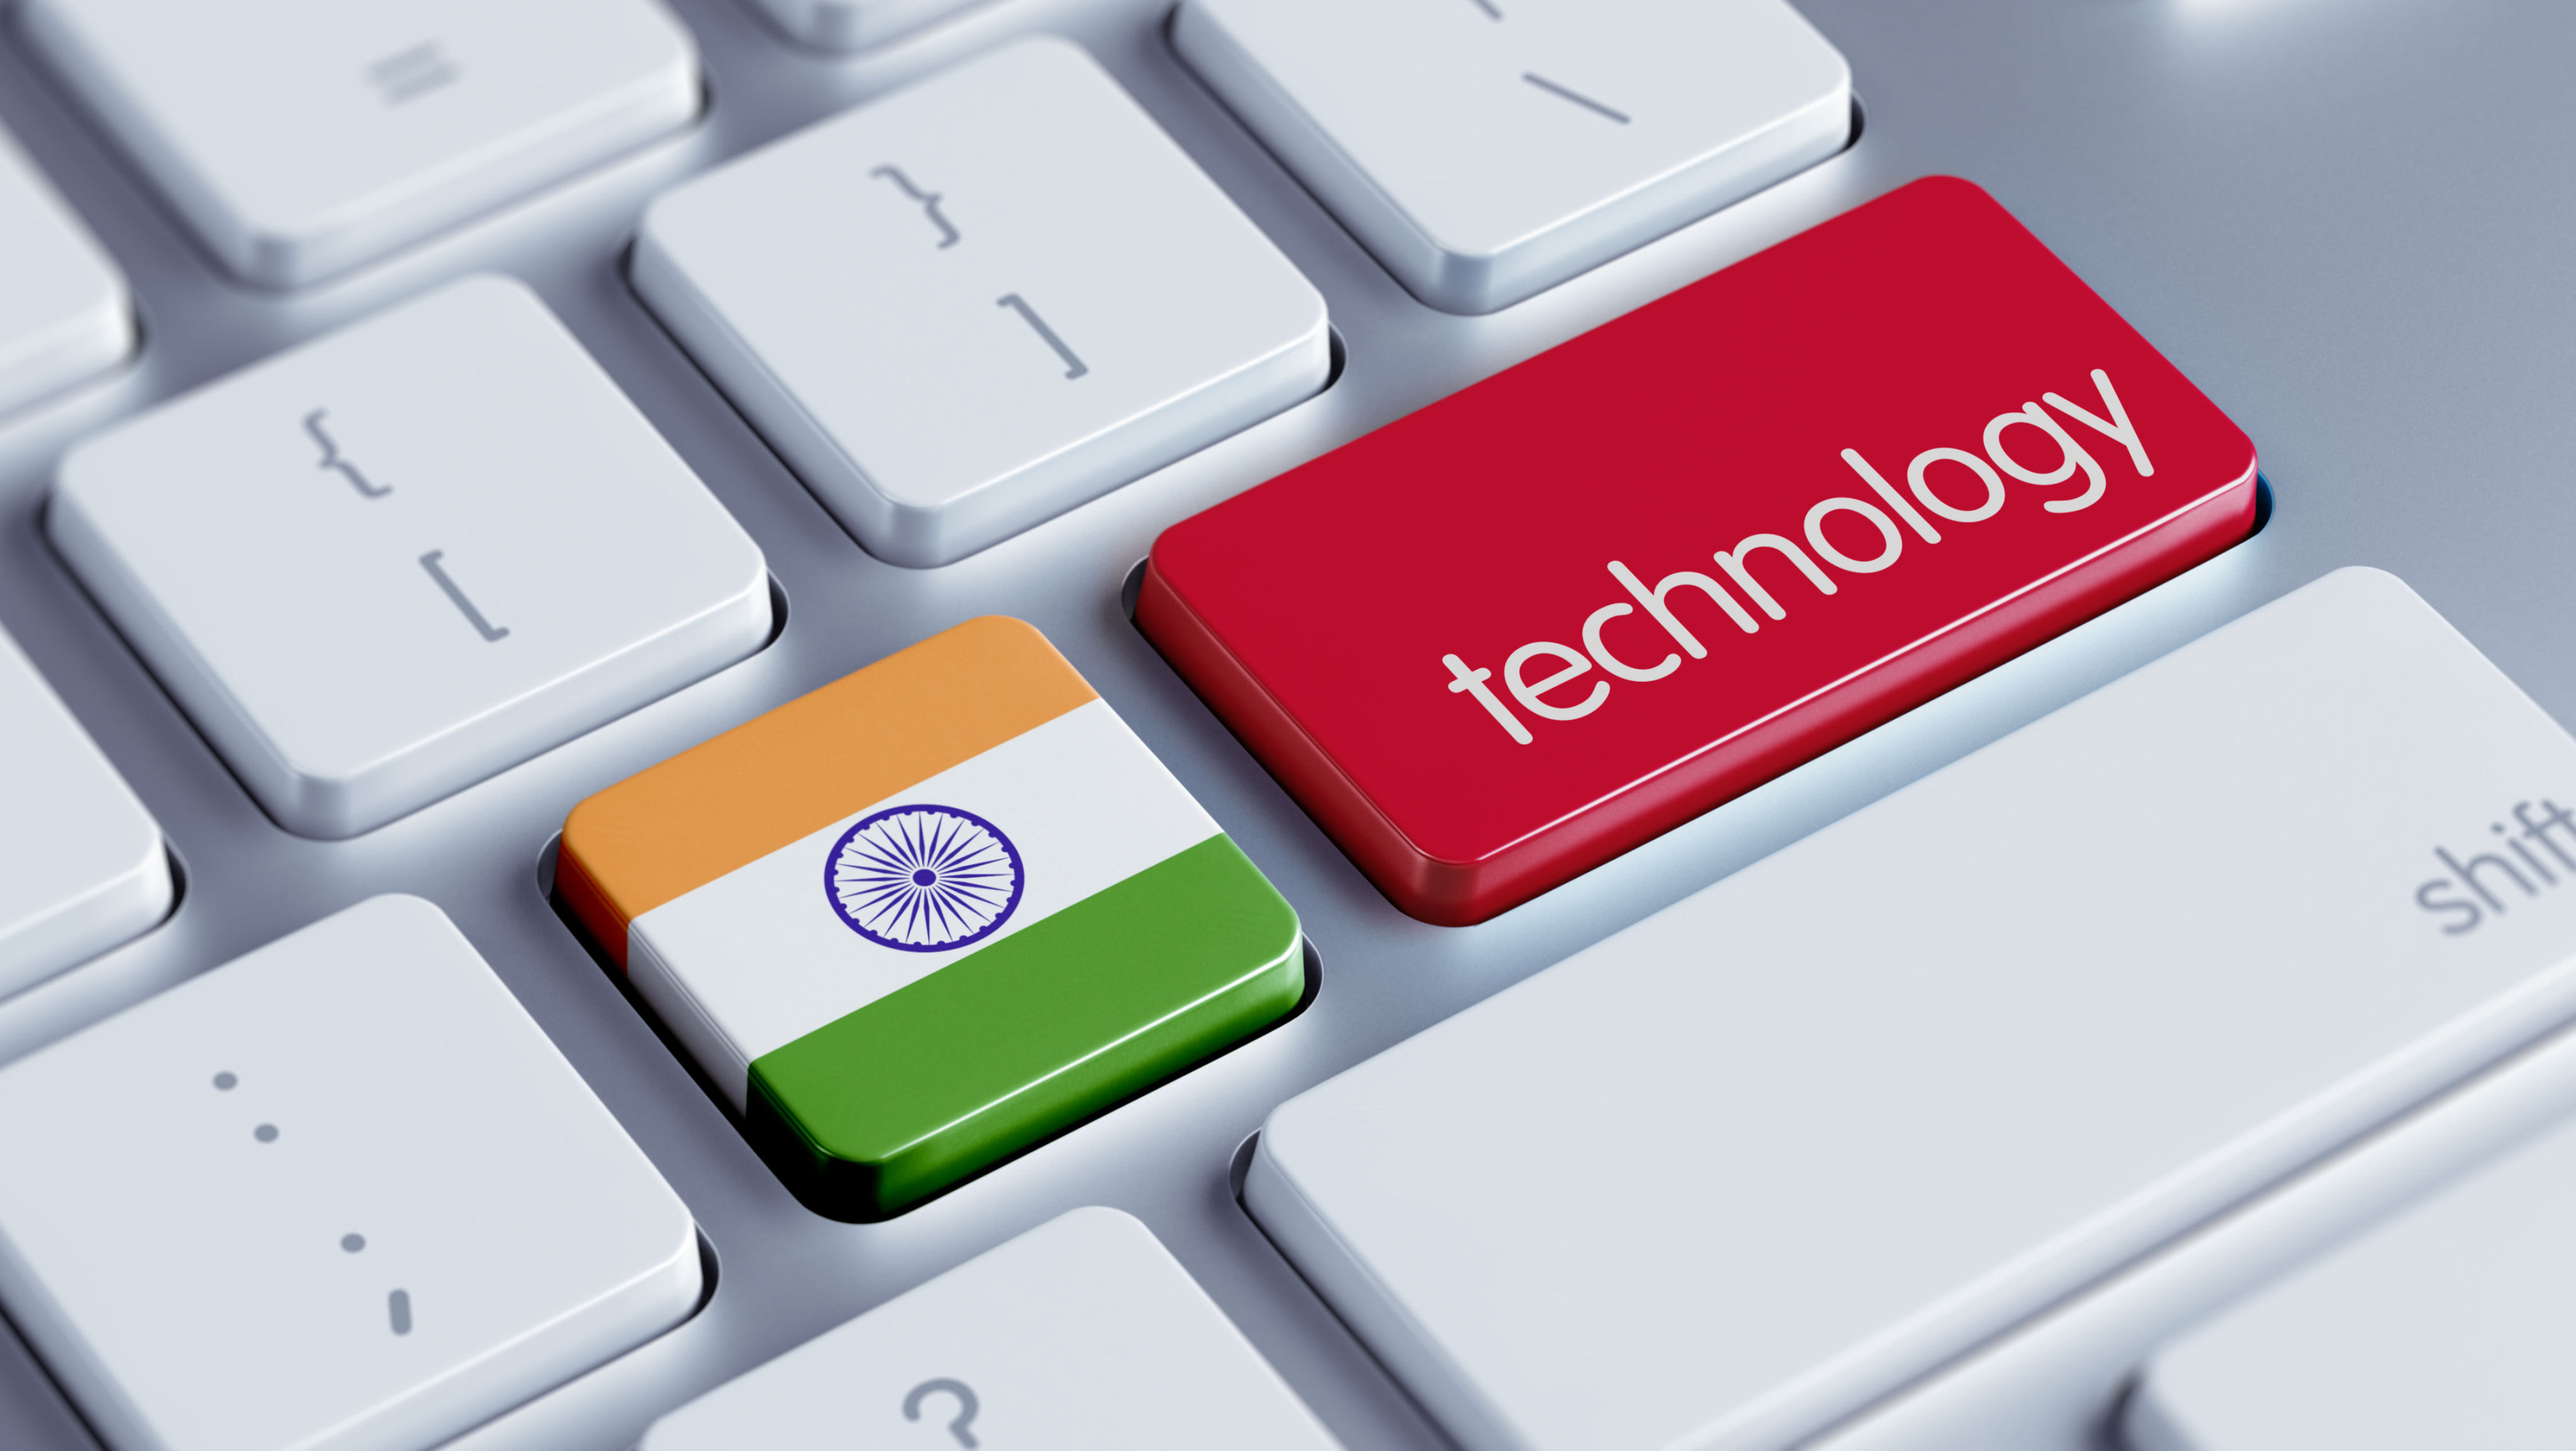 New Delhi’s subsidies for domestic tech hardware production form an integral part of Prime Minister Narendra Modi’s “Make in India” campaign. Image: Shutterstock